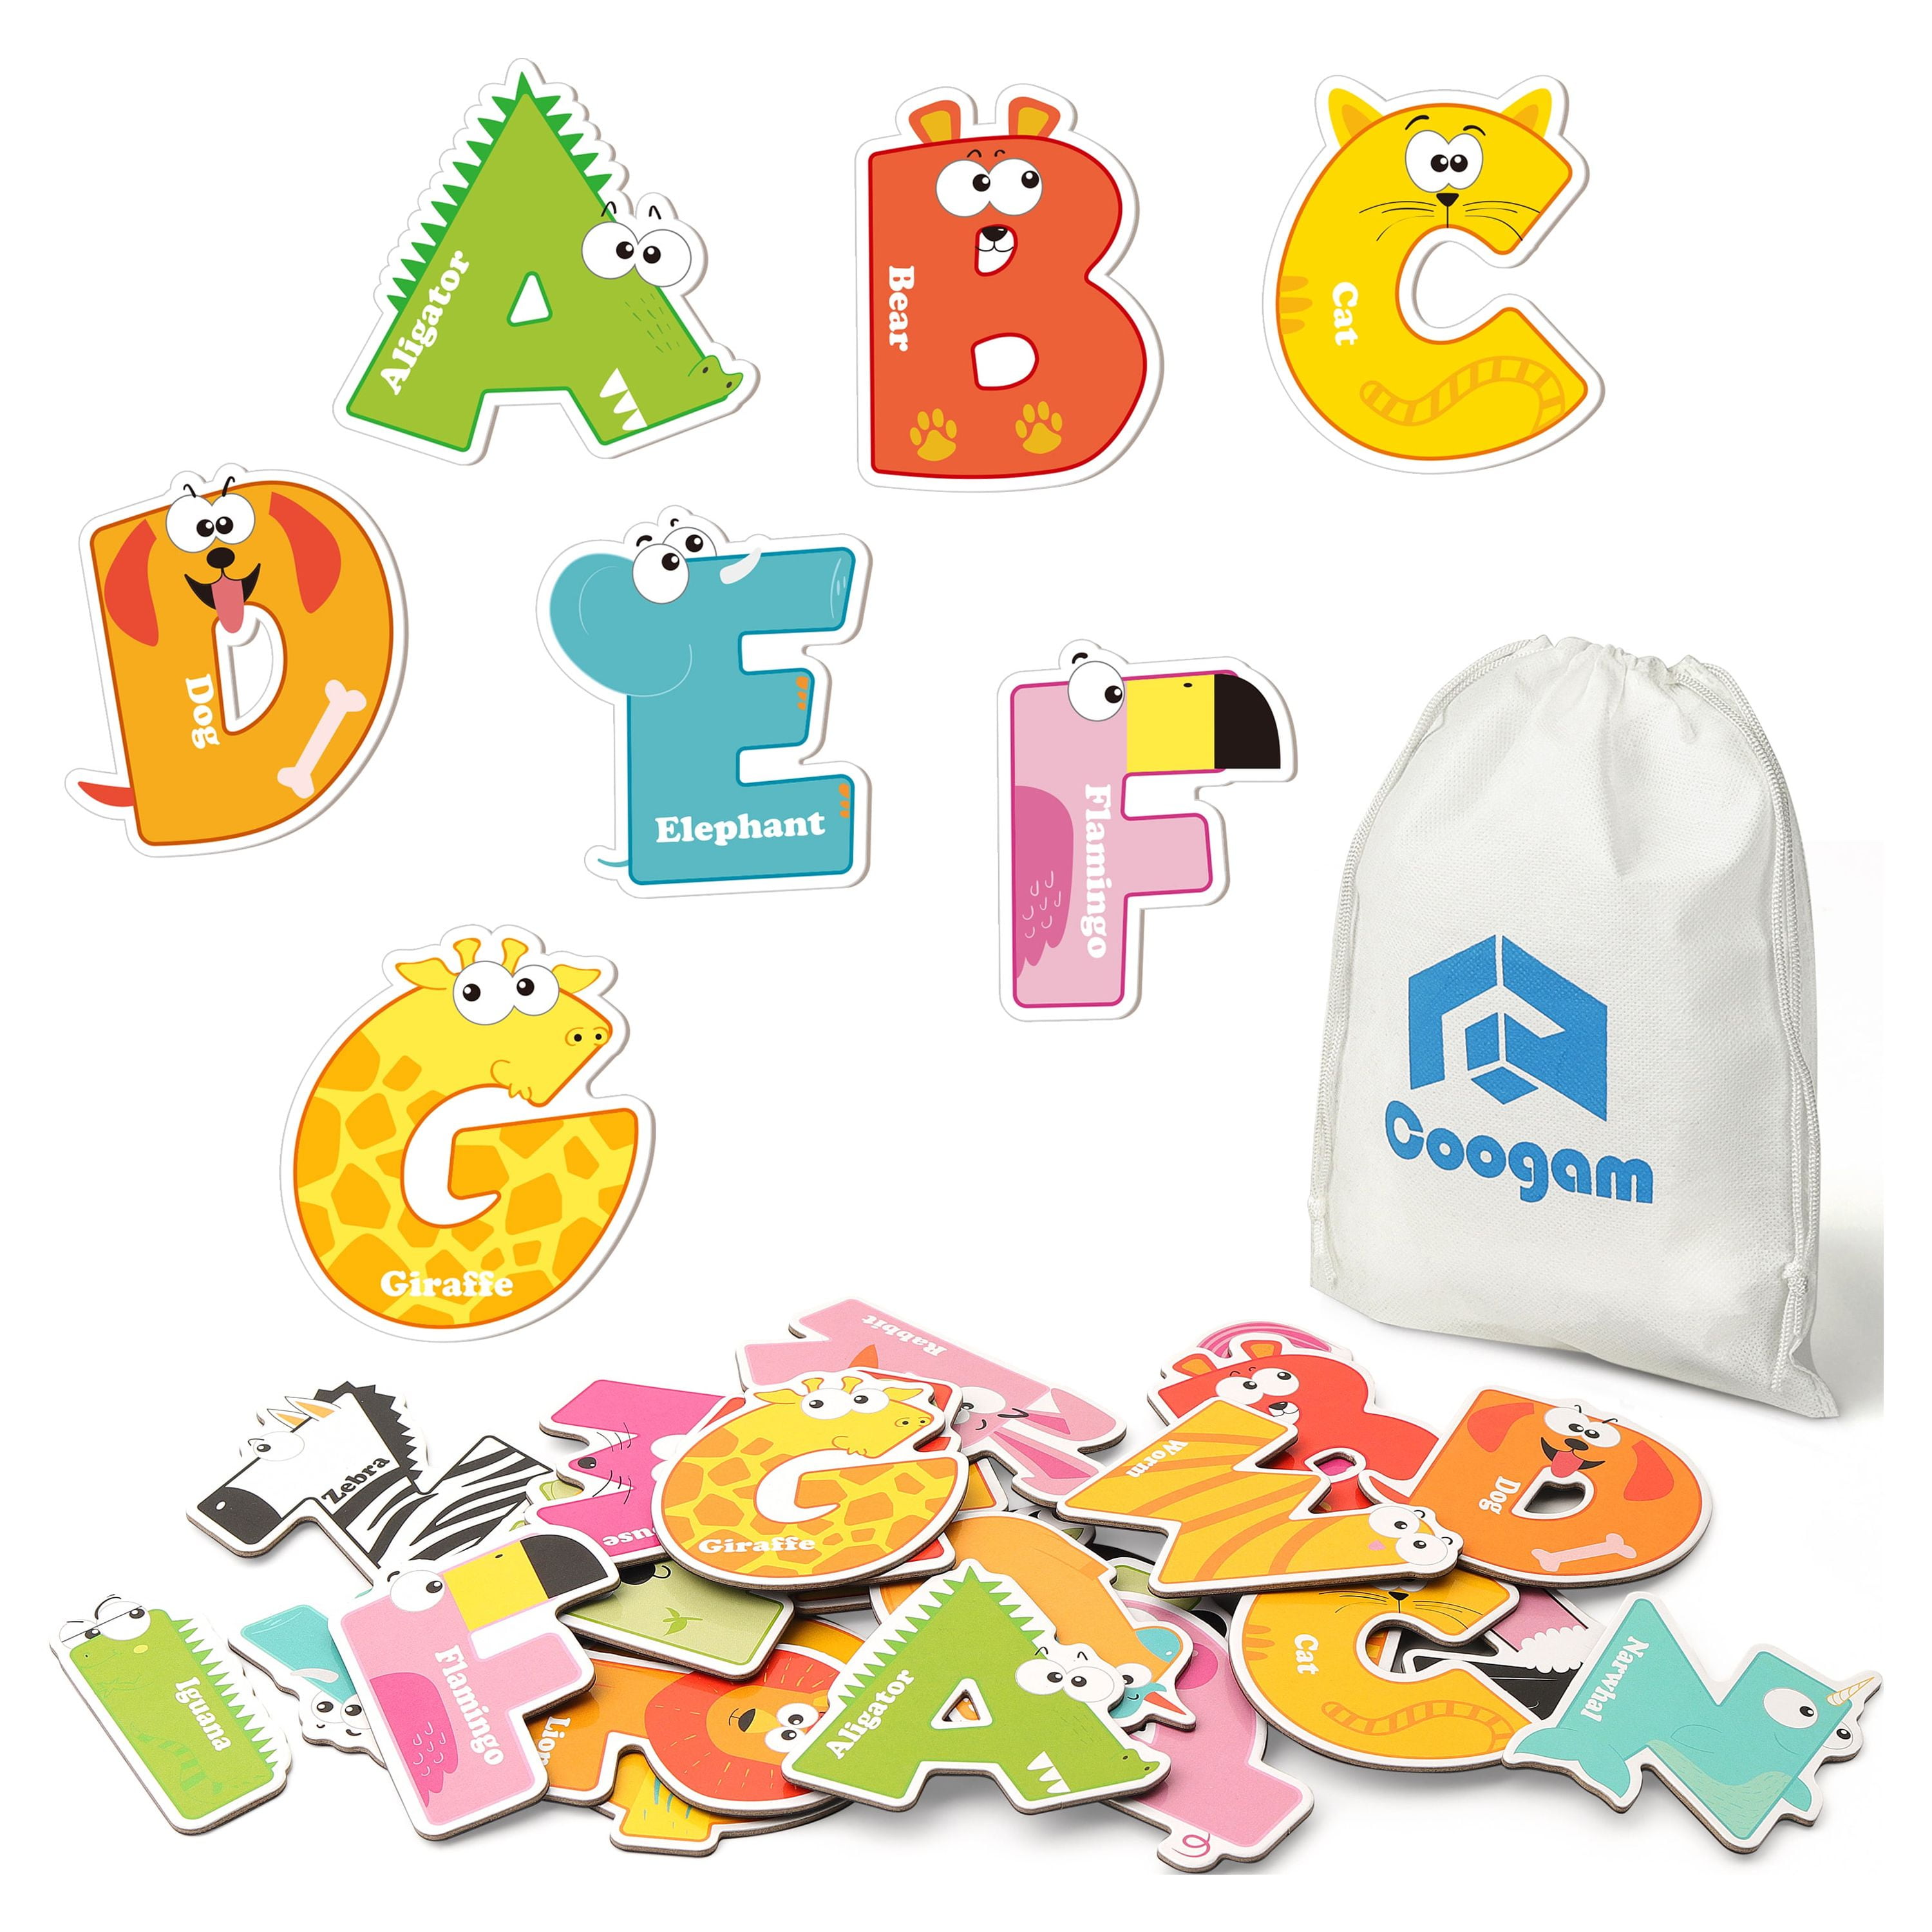 26pcs/set Artisitic Alphabet Letters Drawing Template Bold Engligh